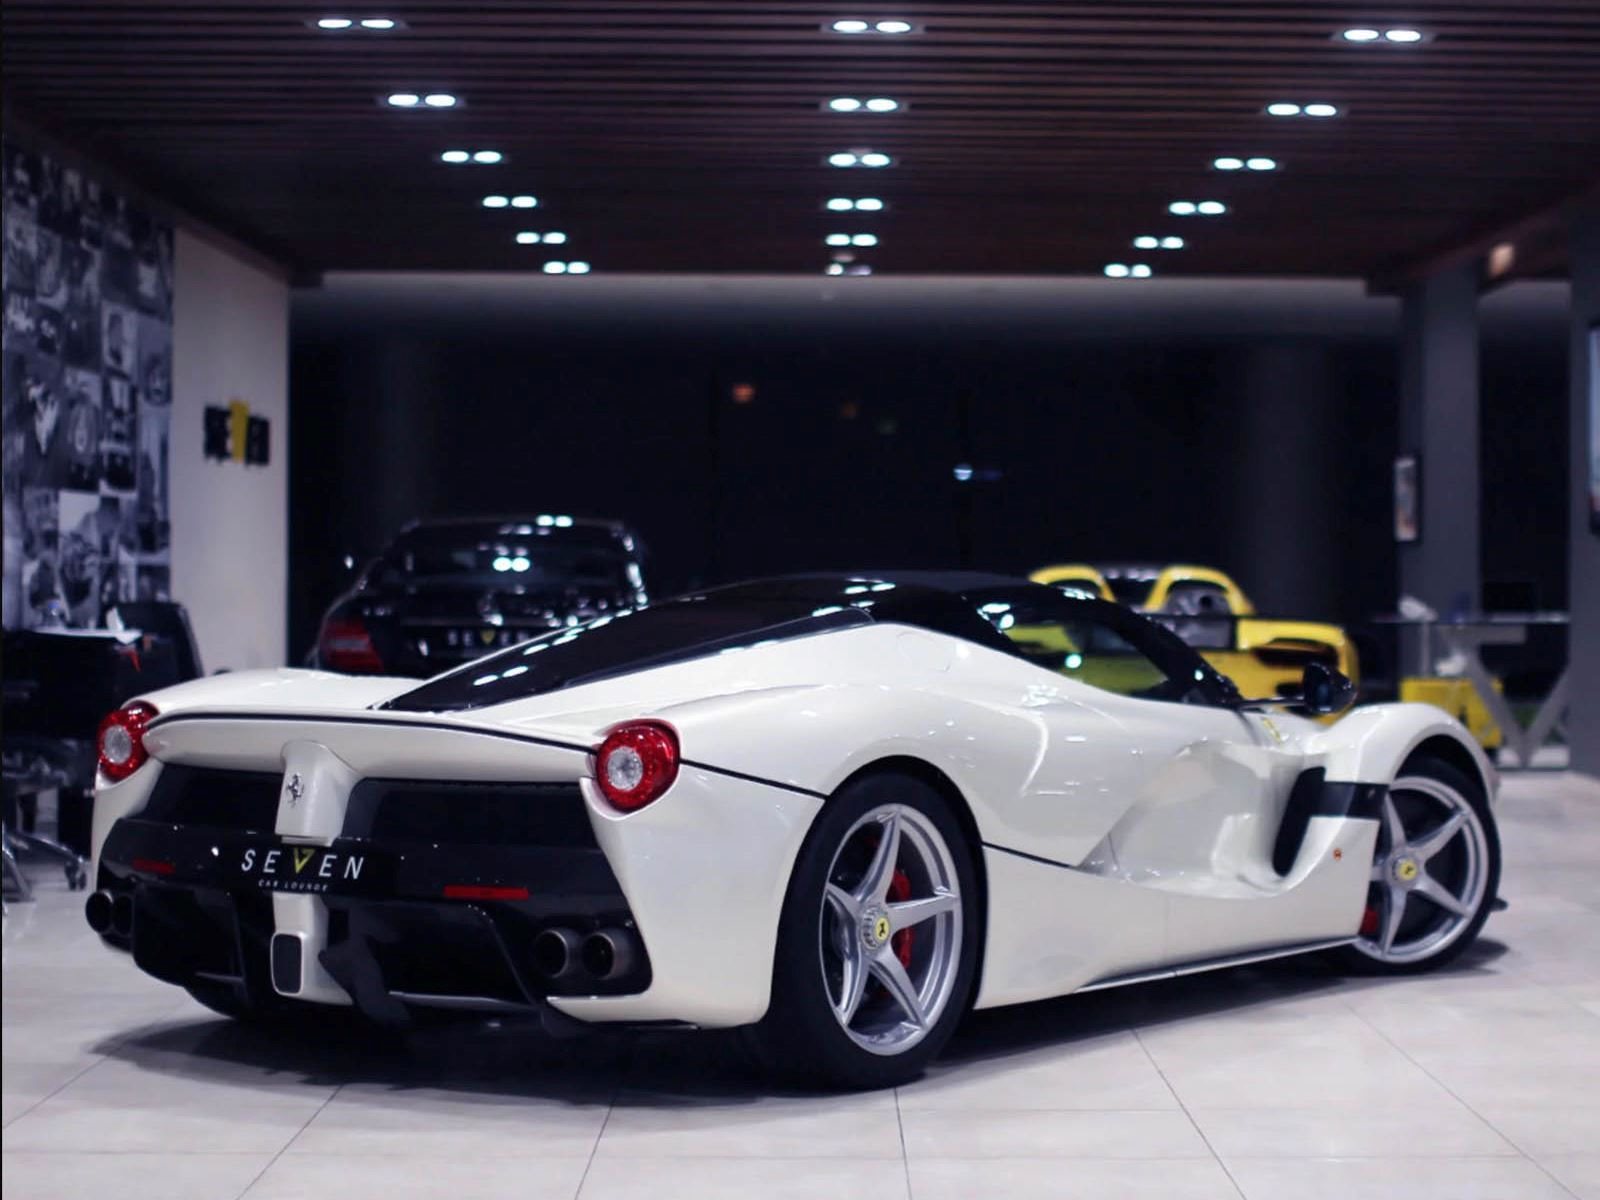 This Stunning White LaFerrari Aperta Has Only Driven 60 Miles | CarBuzz